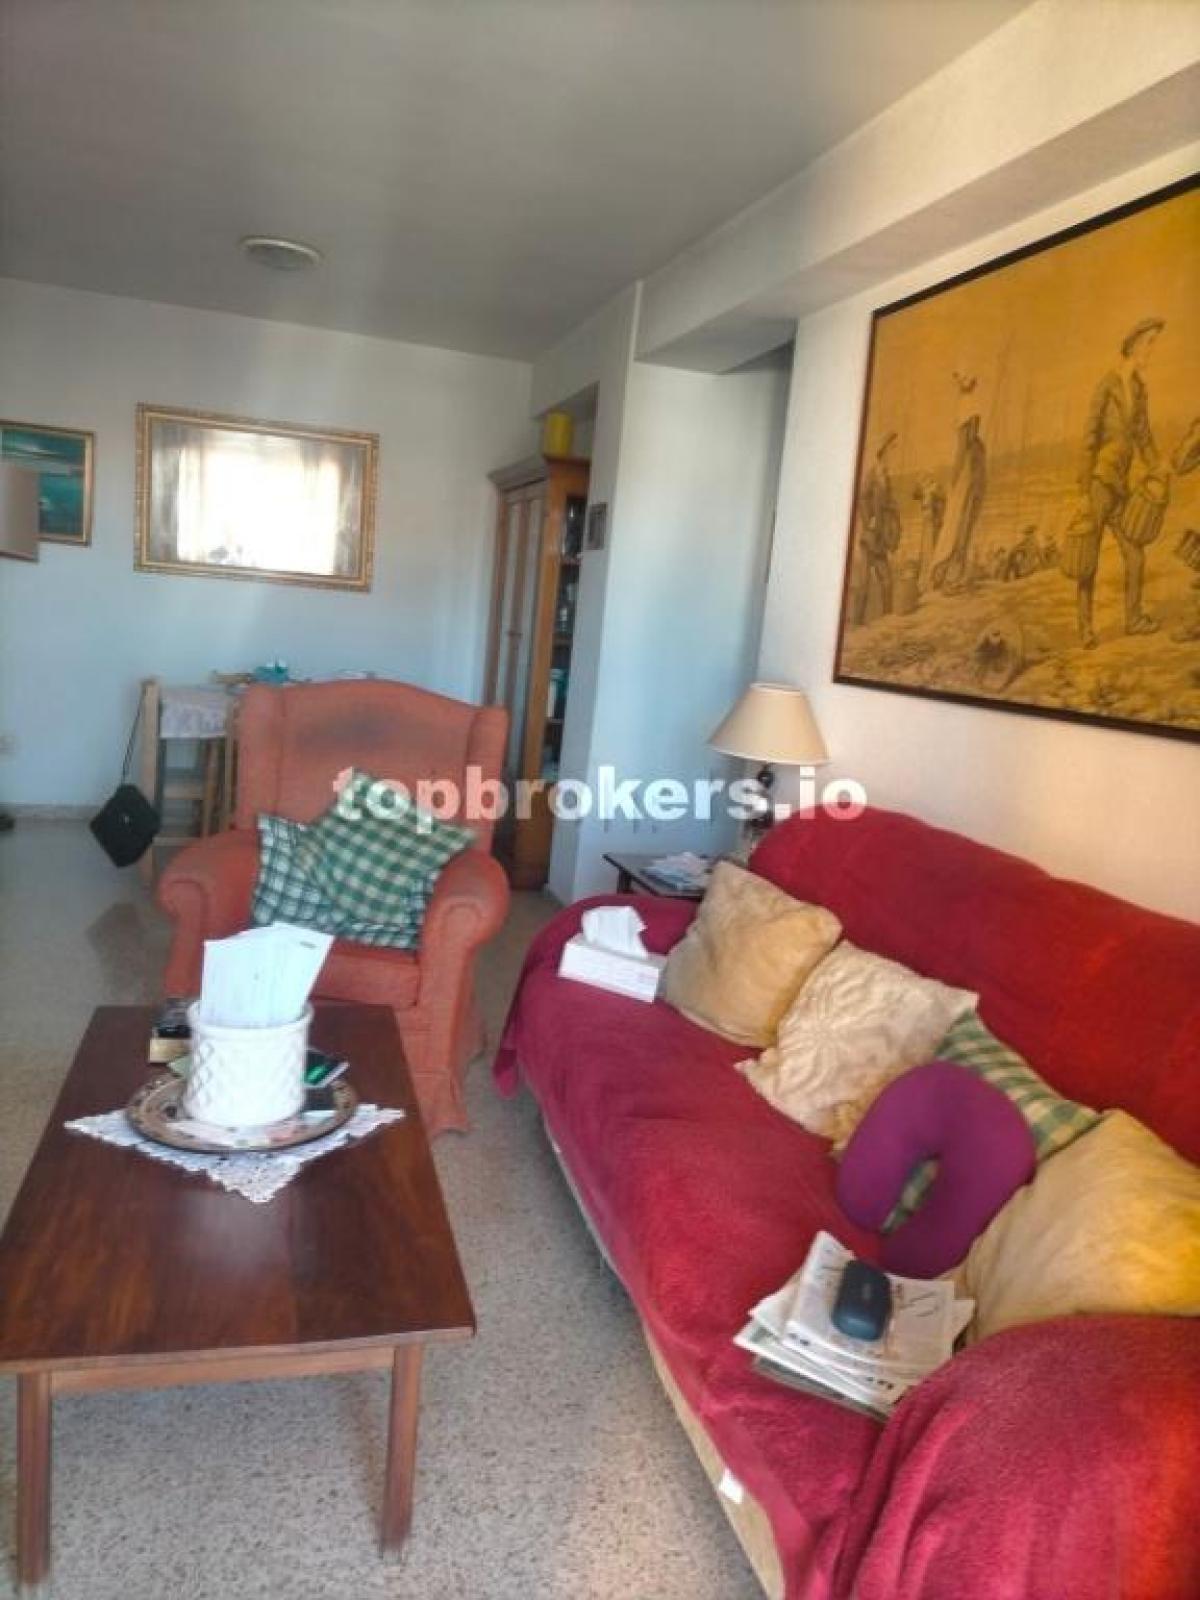 Picture of Apartment For Sale in Torremolinos, Malaga, Spain